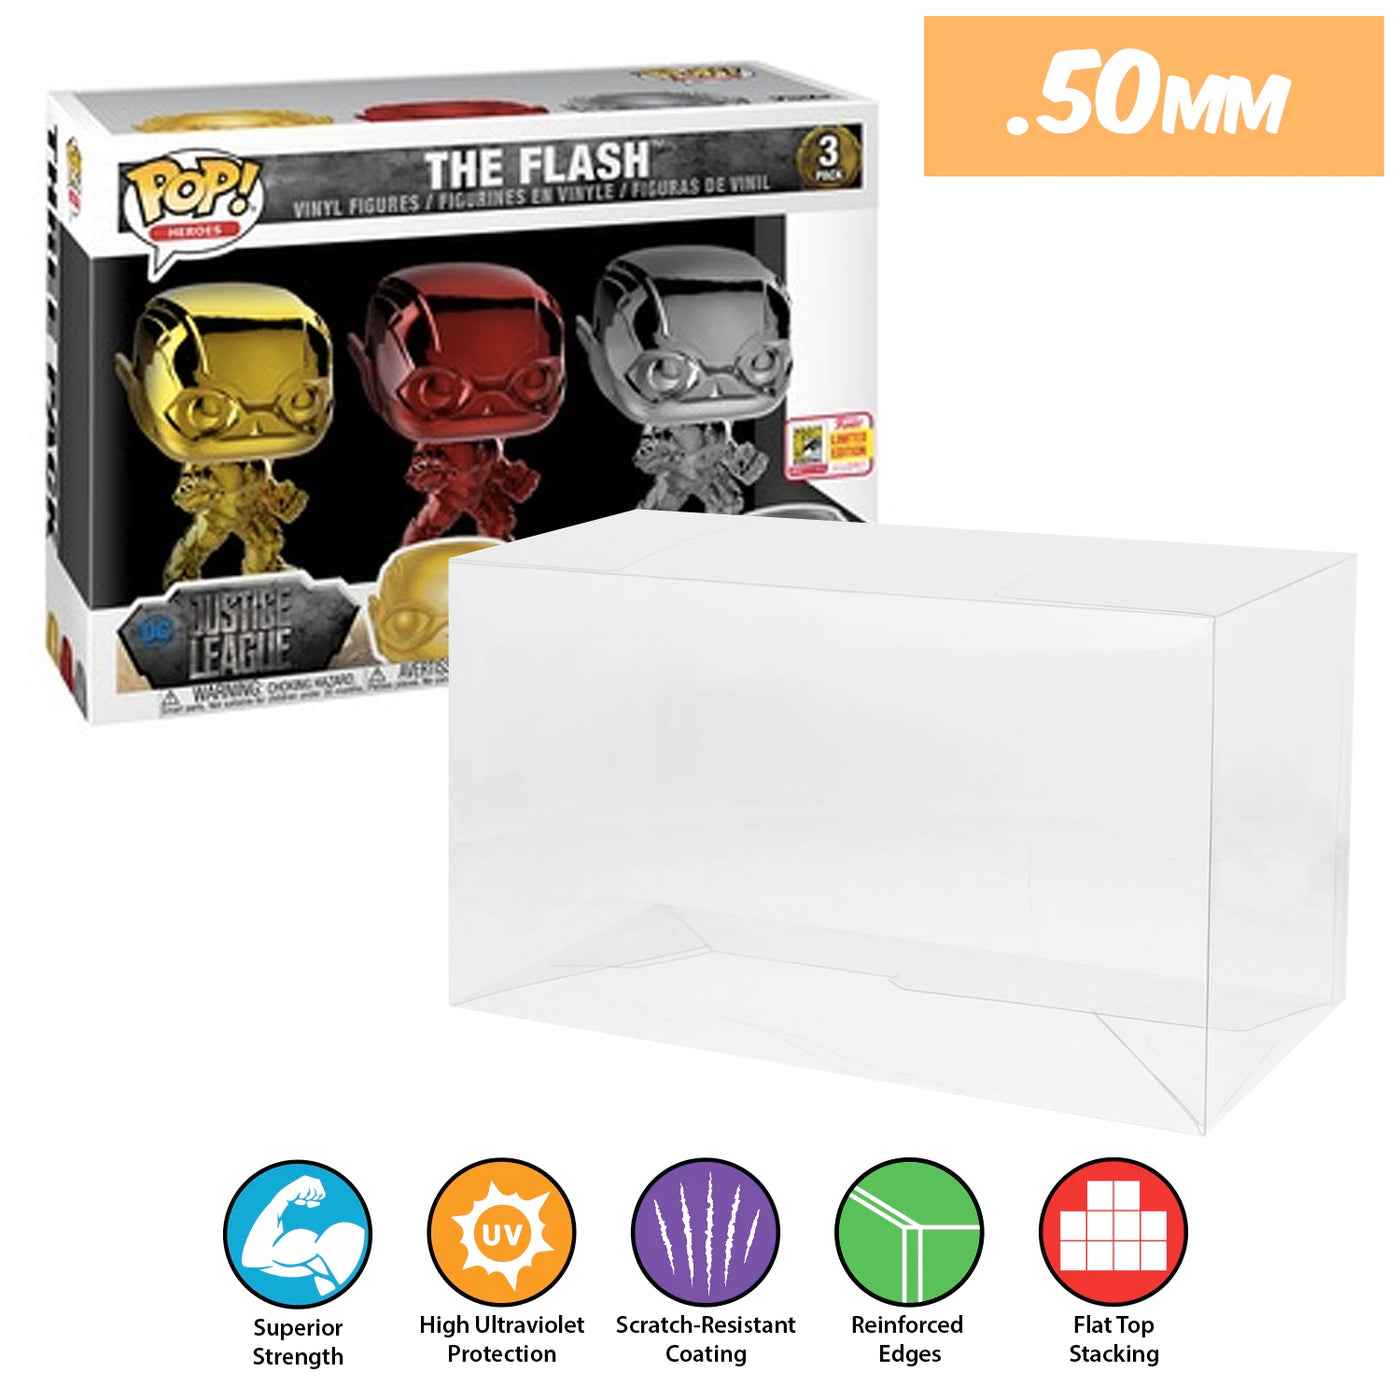 the flash chrome 3 pack best funko pop protectors thick strong uv scratch flat top stack vinyl display geek plastic shield vaulted eco armor fits collect protect display case kollector protector